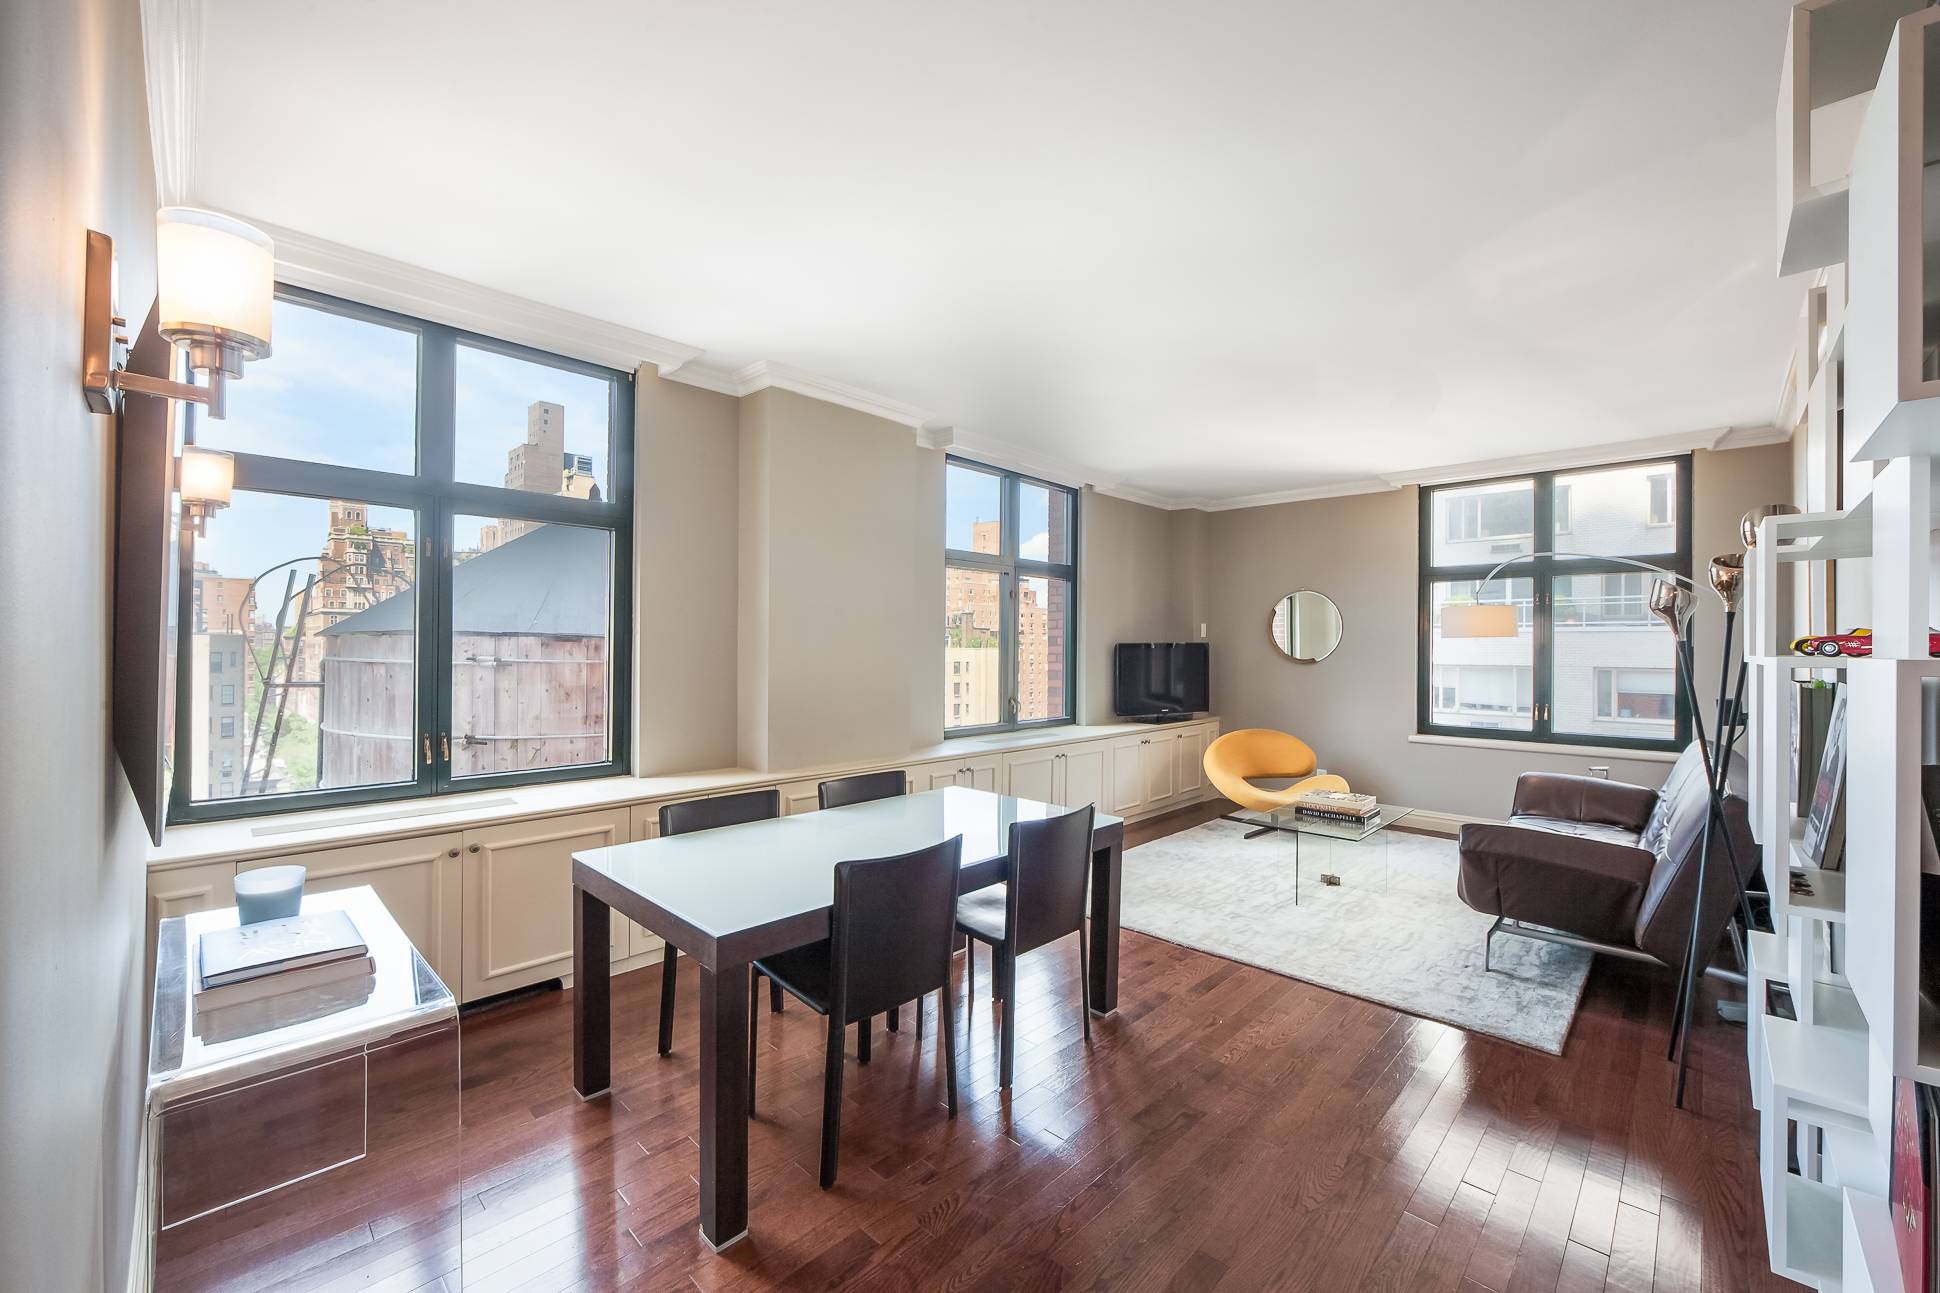 NEW TO MARKET!  TRAFALGAR HOUSE 188 EAST 70TH ULTRA CHIC TWO BEDROOM PRIME BLOCK FURNISHED OR UNFURNISHED RENTAL